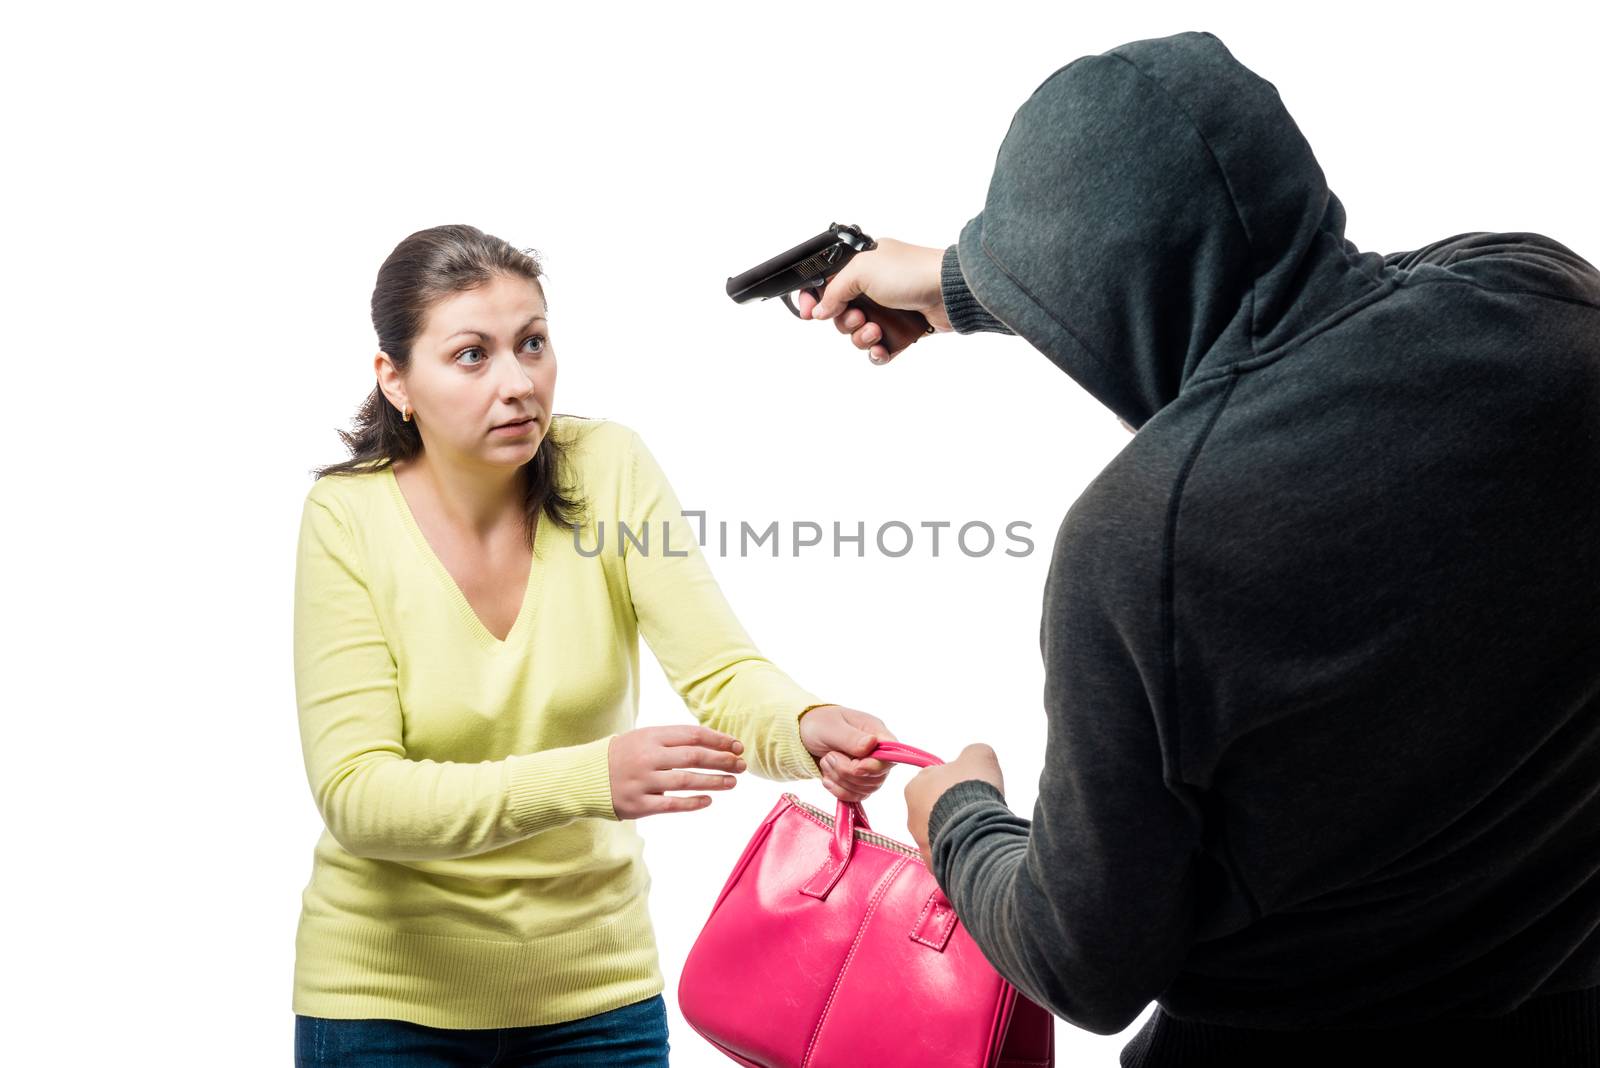 Armed robber and victim with a bag on a white background